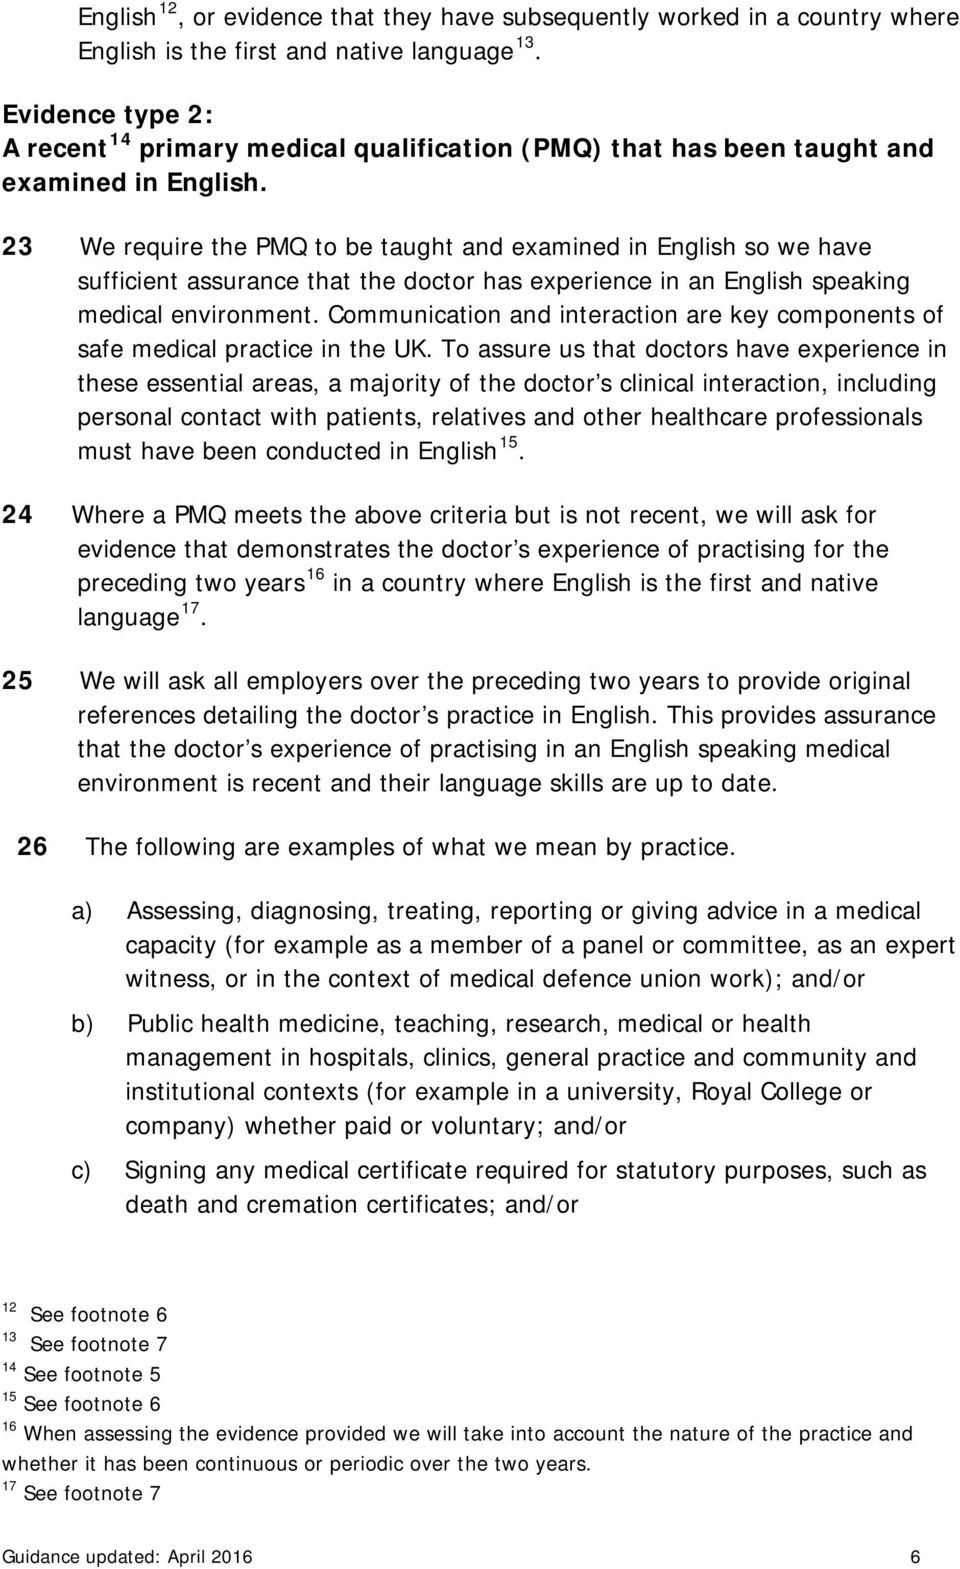 23 We require the PMQ to be taught and examined in English so we have sufficient assurance that the doctor has experience in an English speaking medical environment.